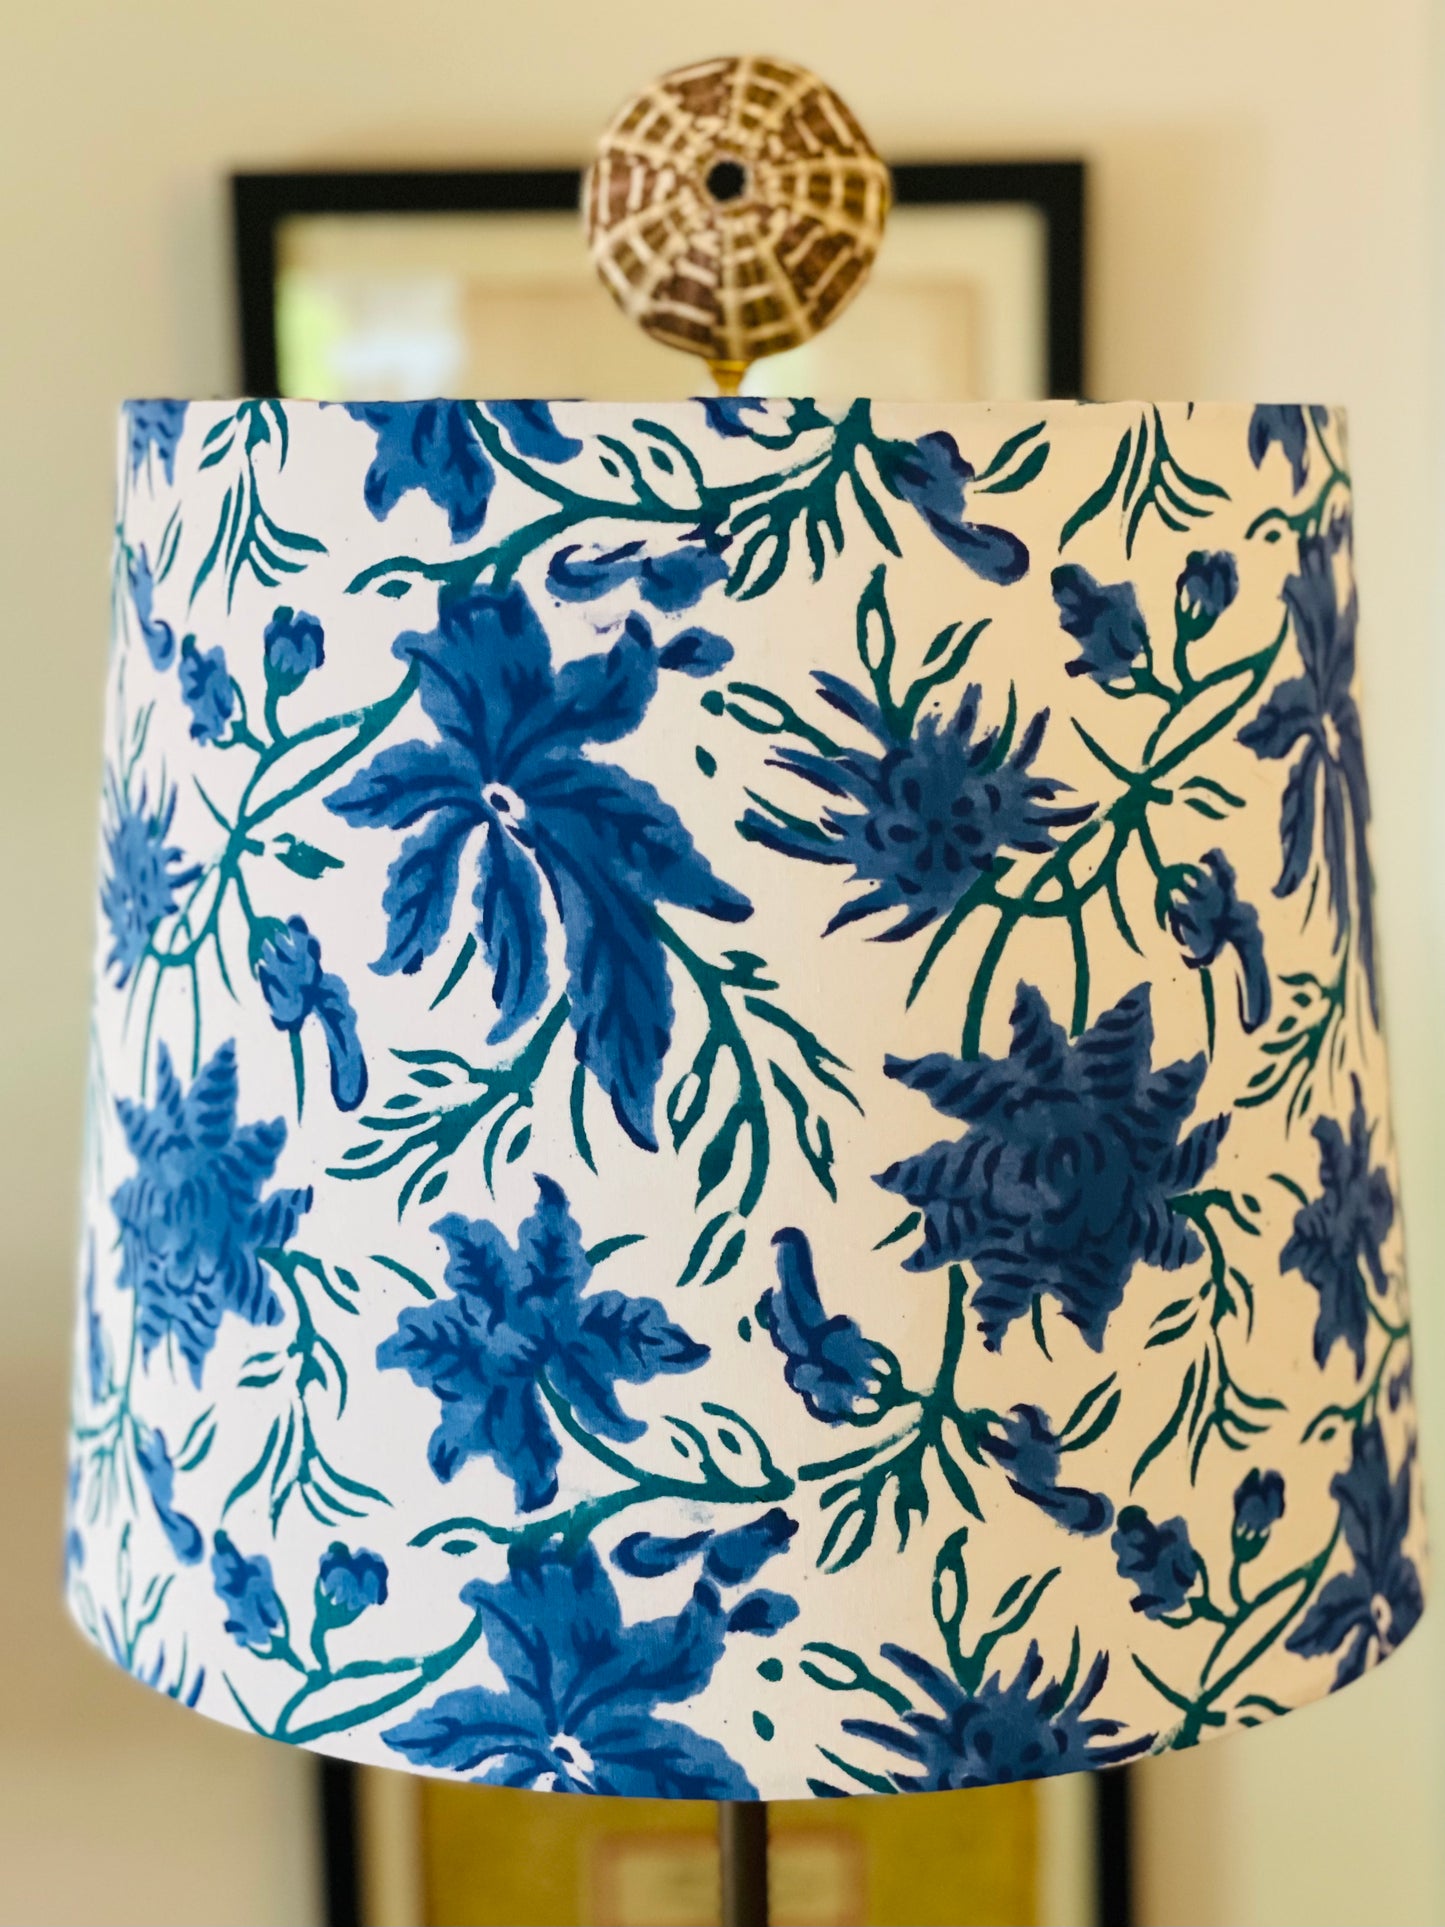 Medium Empire Lampshade. Hand Block Print from India. Bright Blue and Dark Teal Floral.